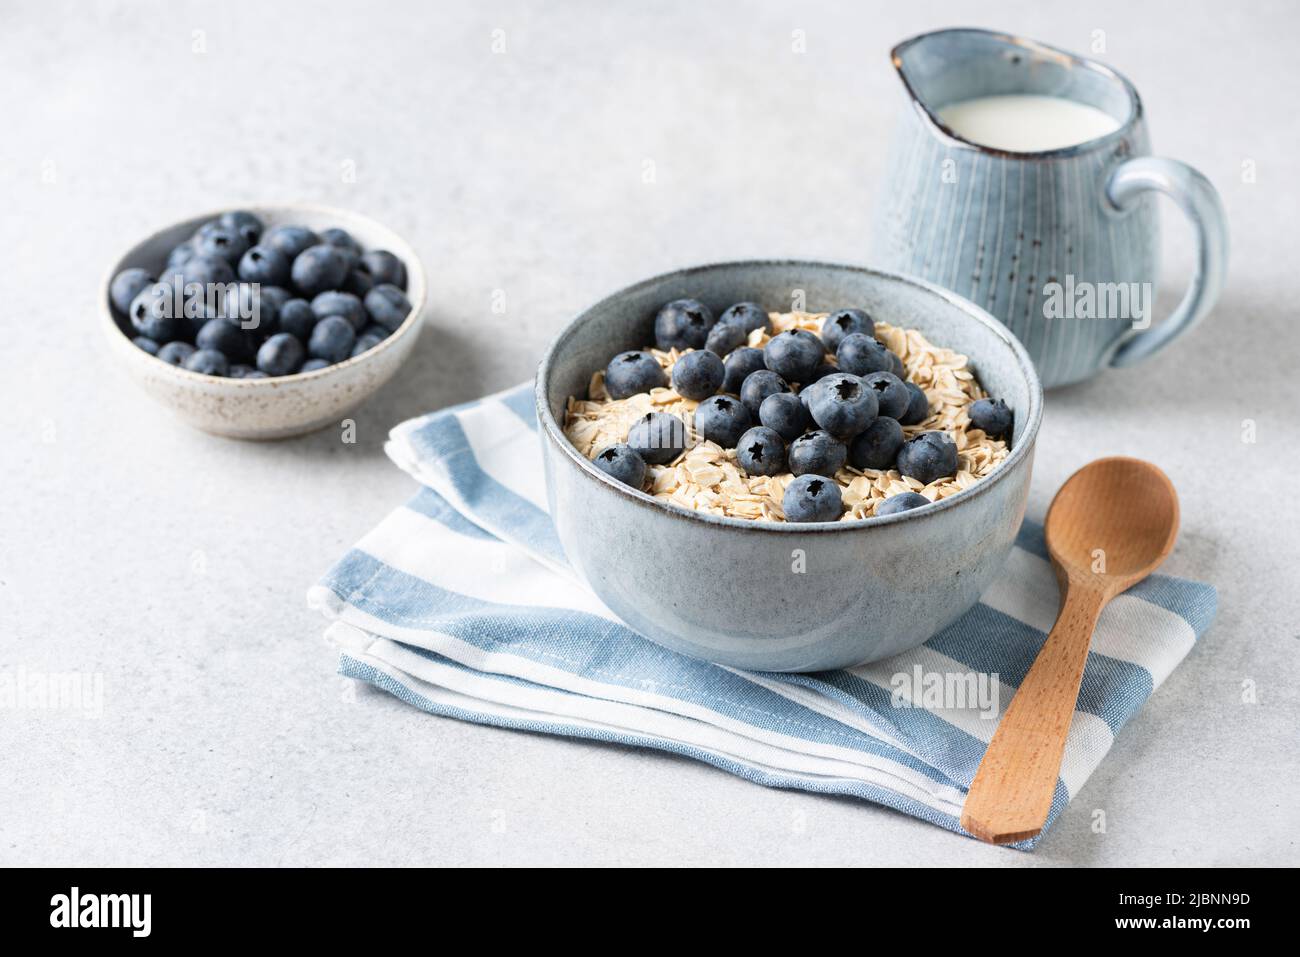 Uncooked oatmeal porridge with blueberries in bowl. Oat flakes, rolled oats. Breakfast meal concept Stock Photo